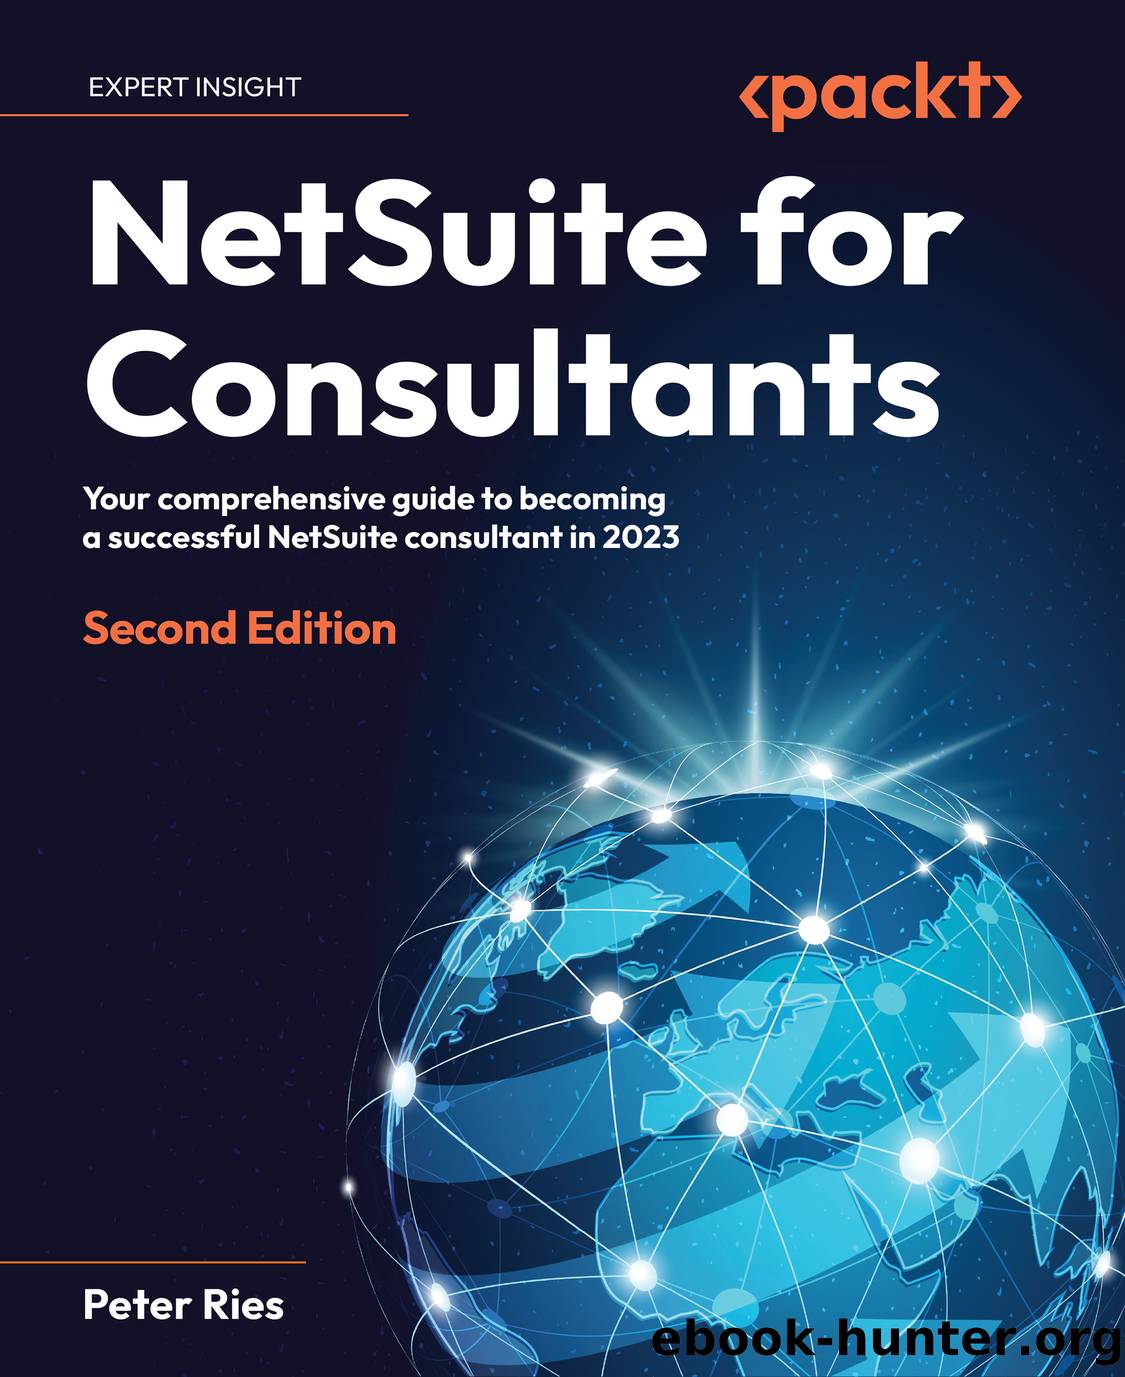 NetSuite for Consultants - Second Edition by Peter Ries